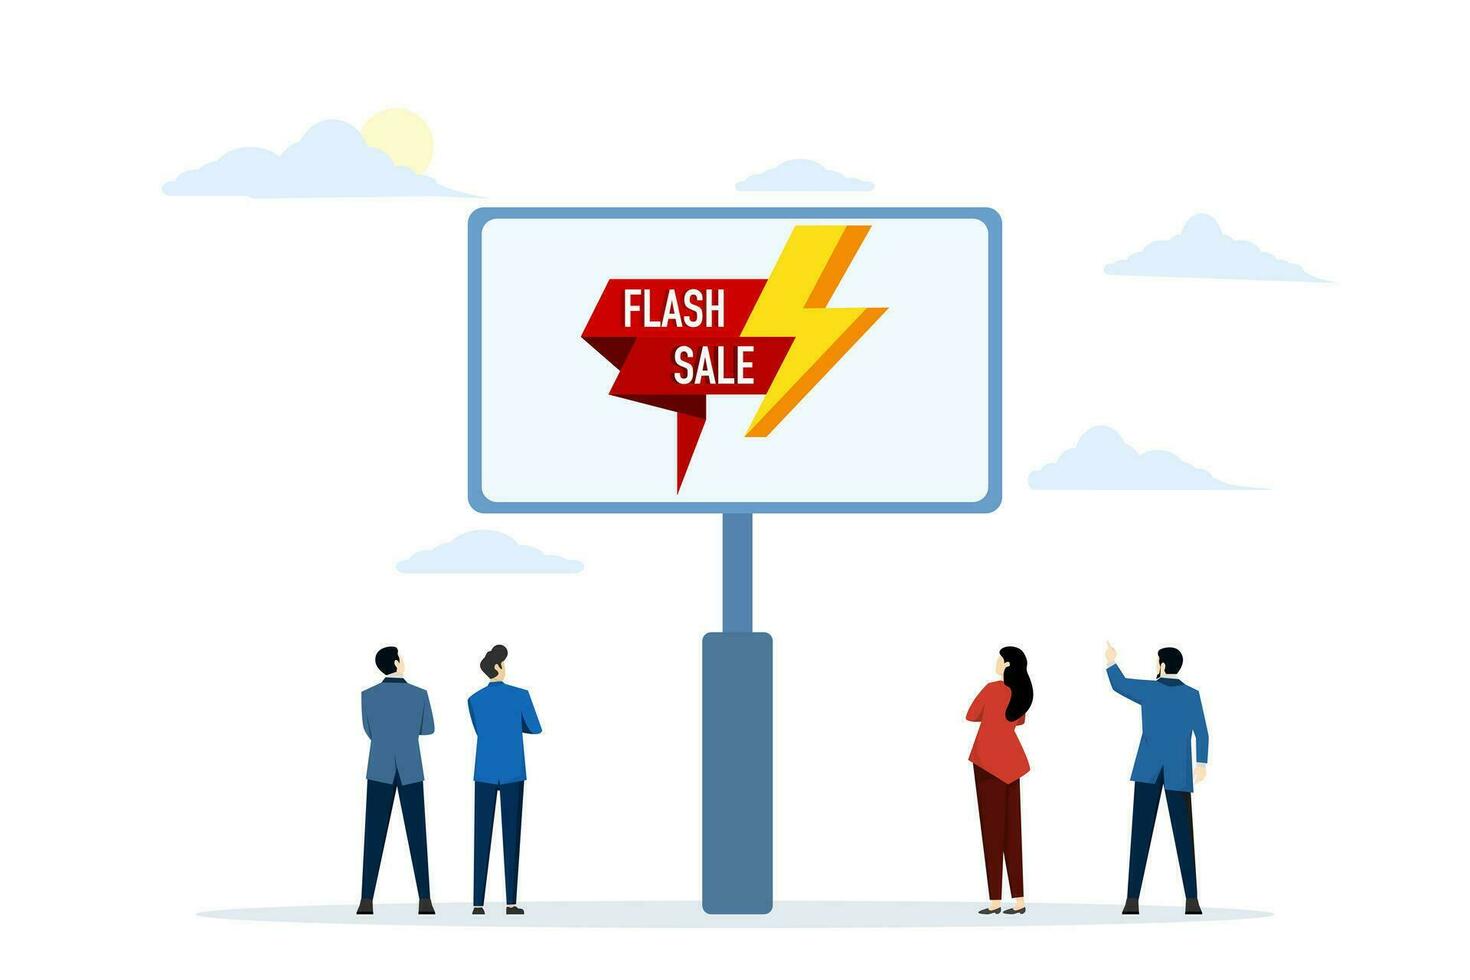 flash sale and special offer concept for web banner and website. People looking at big sale banner or billboard. Business promotion. Landing page template. Flat vector illustration.